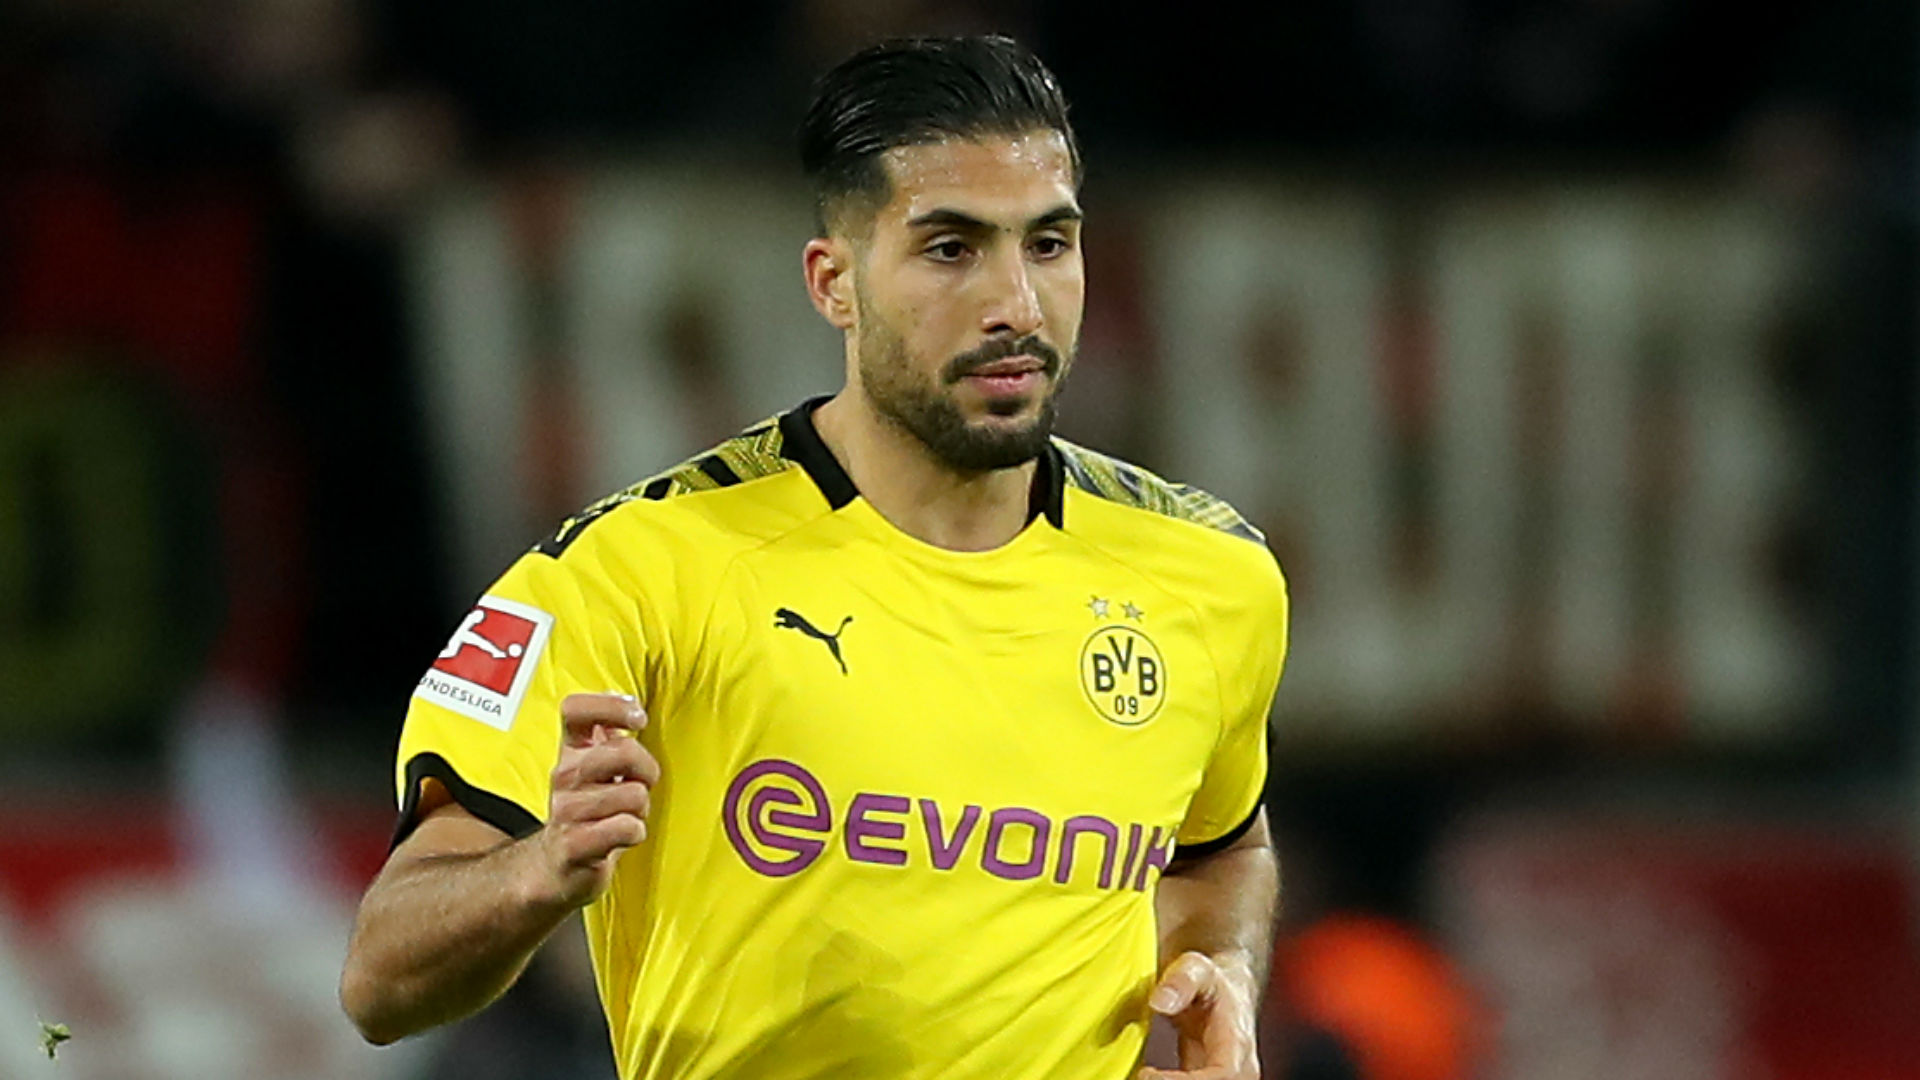 Dortmund make Emre Can's move from Juventus permanent